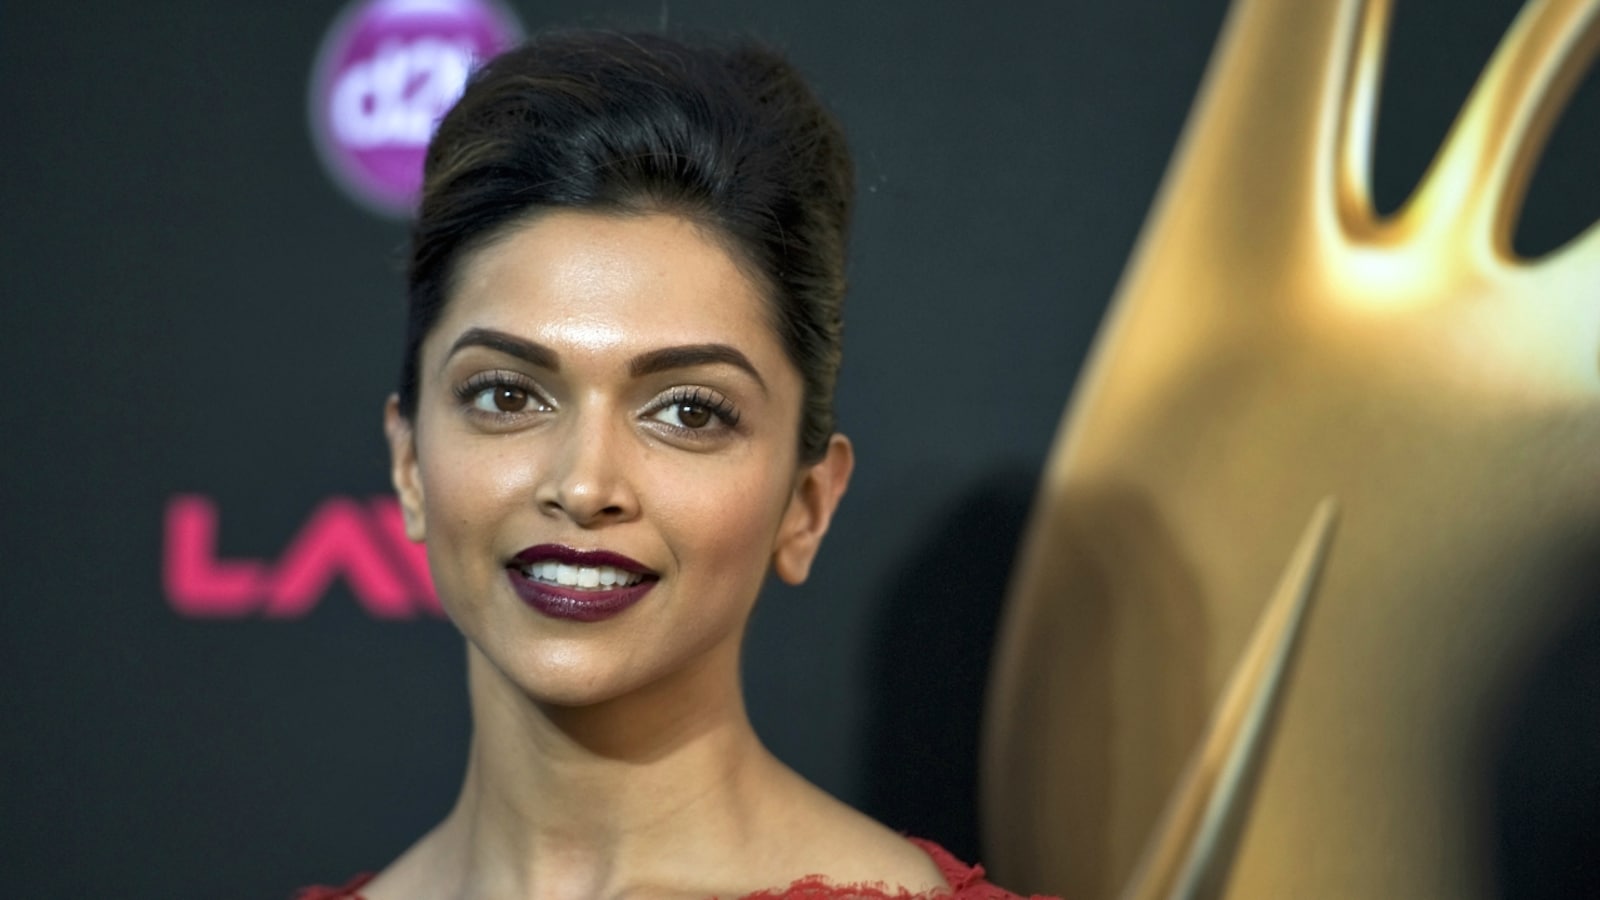 Storyboard  Why Adidas roped in Deepika Padukone as its new brand